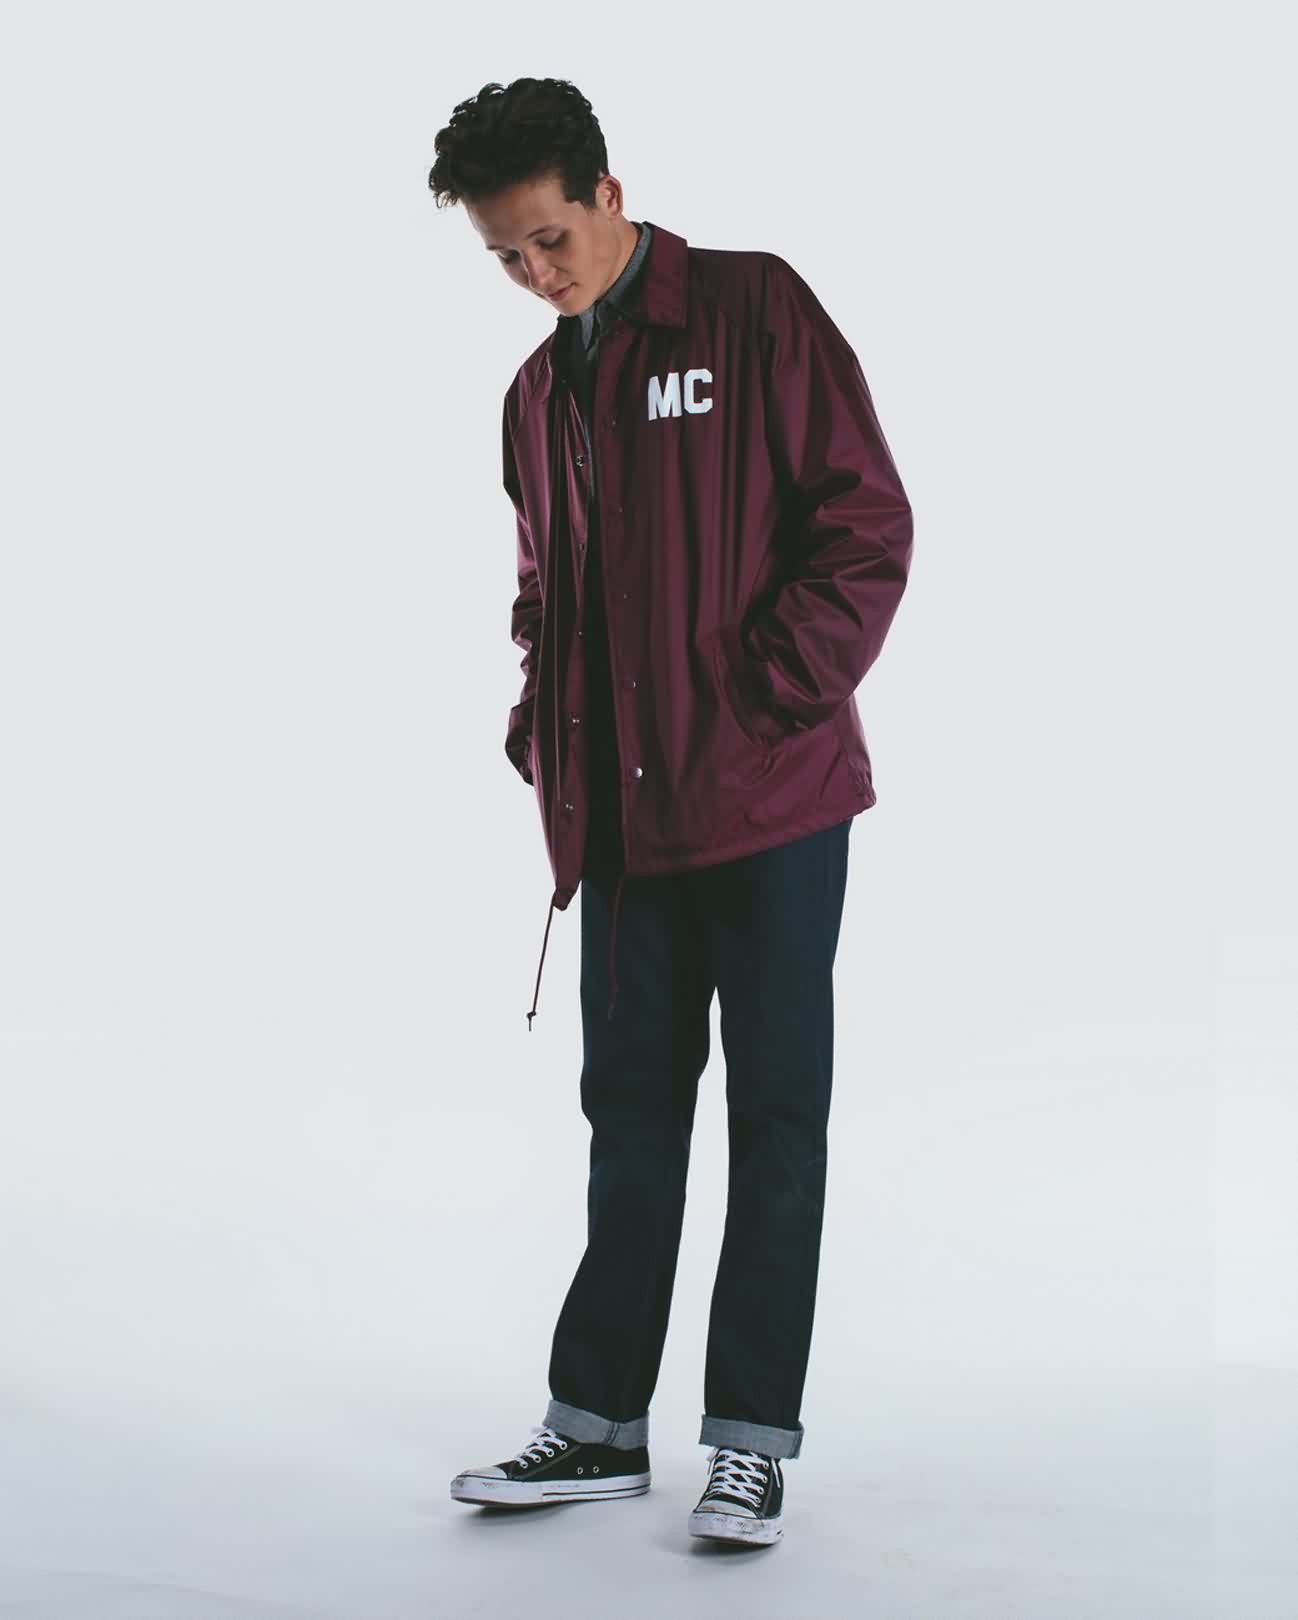 Matix Fall 2016 Mens Sportswear Lifestyle Clothing Collection